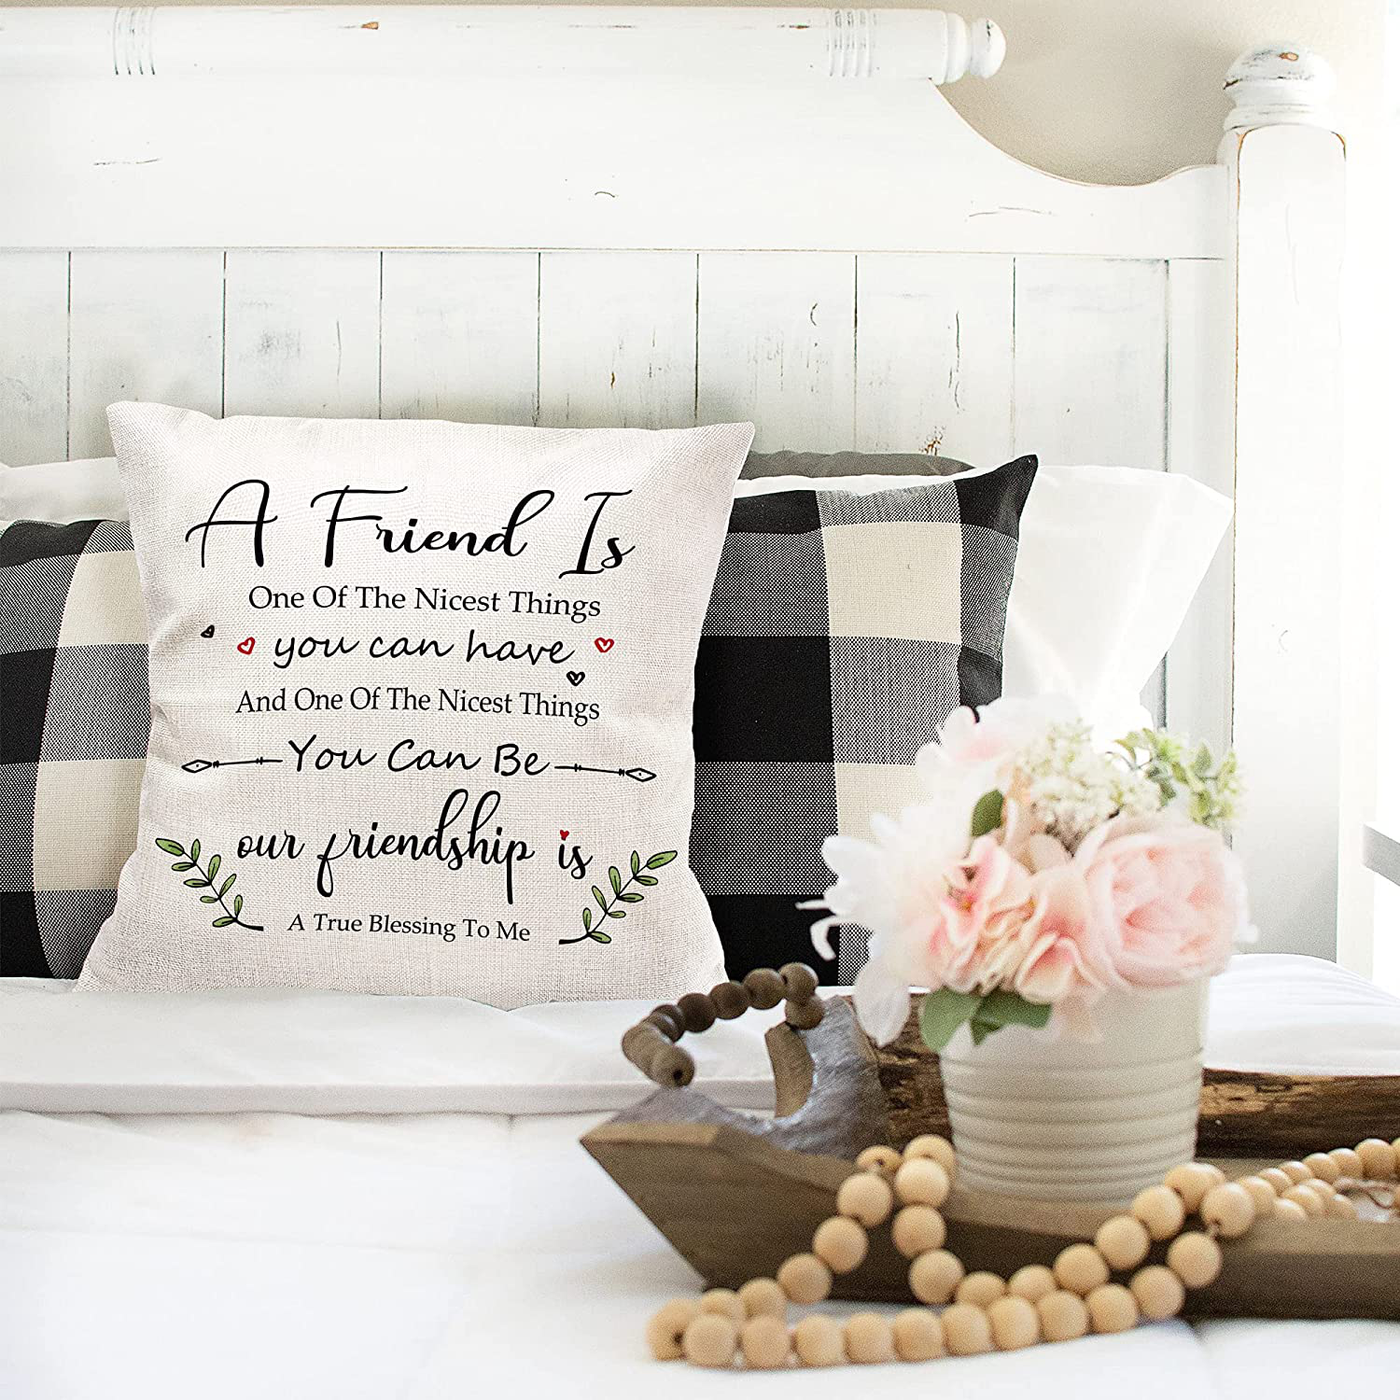 Friendship Gifts, Pillow Cases 18 x 18 with Friend Quotes, Decorative Pillow Covers with Sayings, Personalized White Couch Covers for Home, Cute Birthday Christmas Thank You Presents for Women and Men